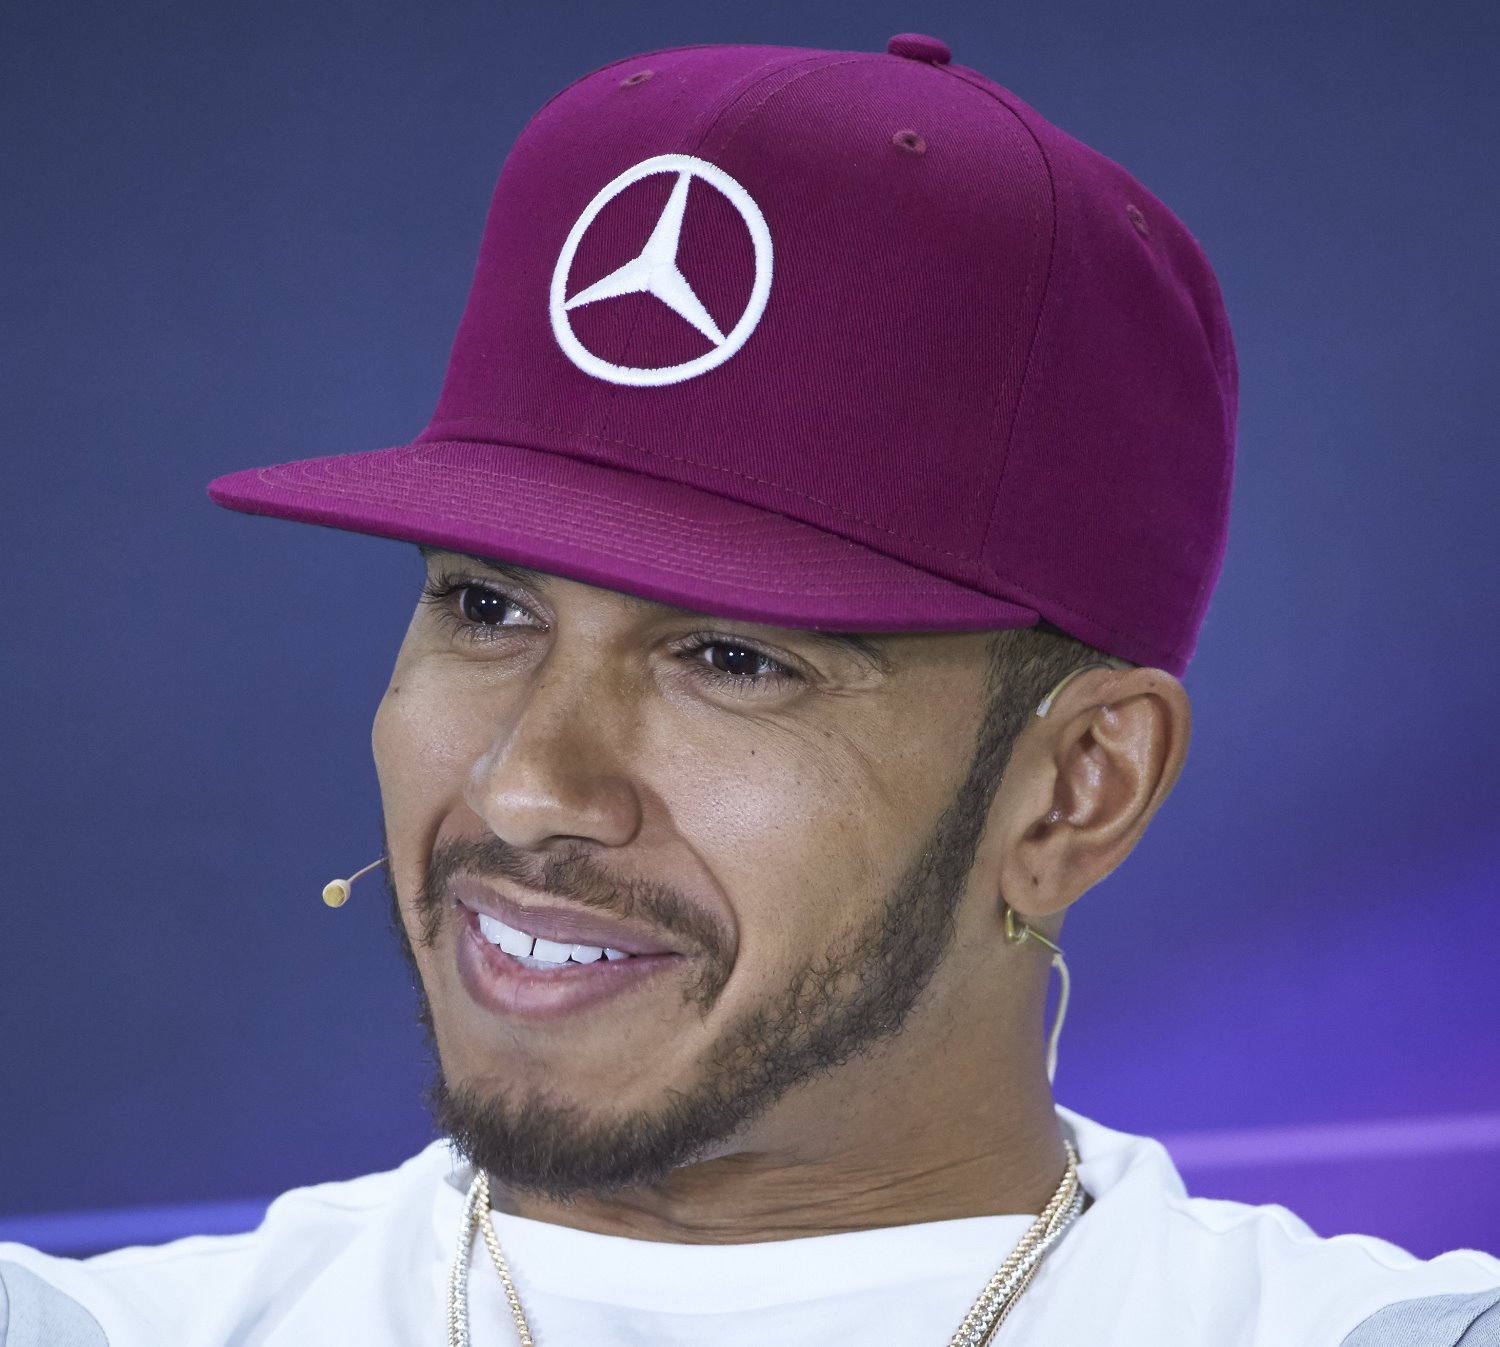 Hamilton knows in his heart when you have the superior car on the grid you have only one person to beat - your teammate.